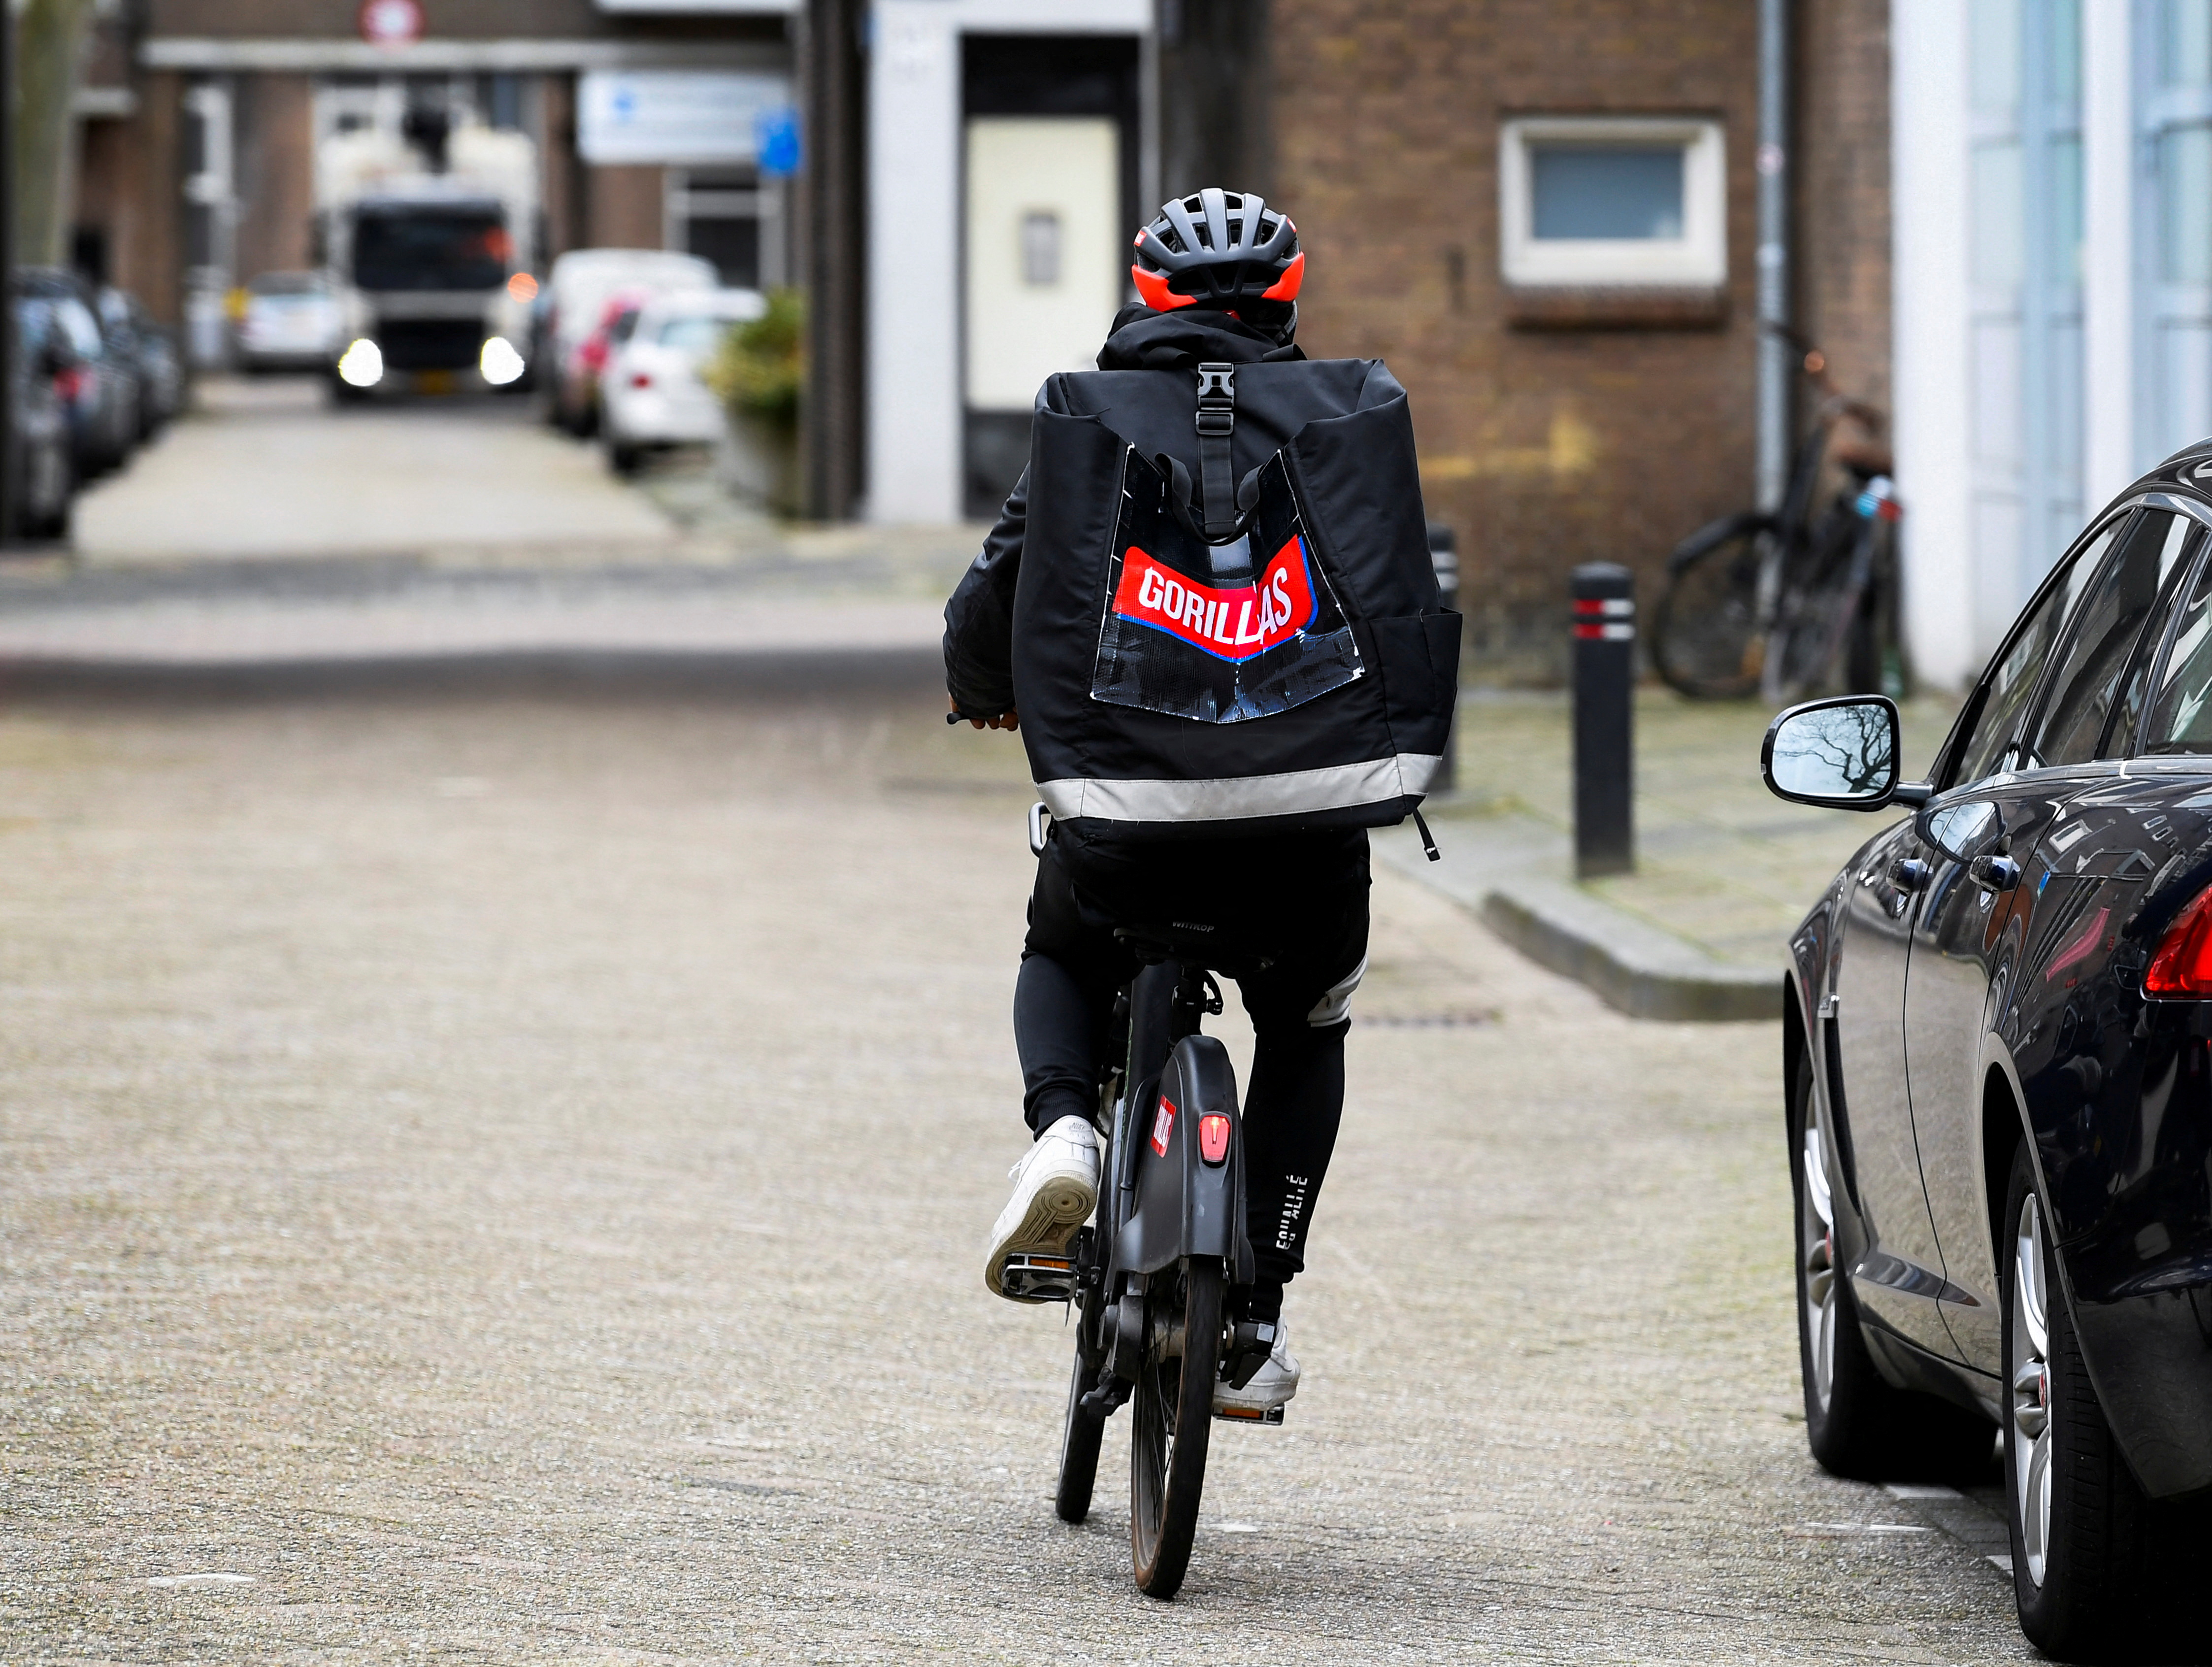 A courier of the fast grocery deliverer Gorillas rides a bike in Rotterdam, Netherlands